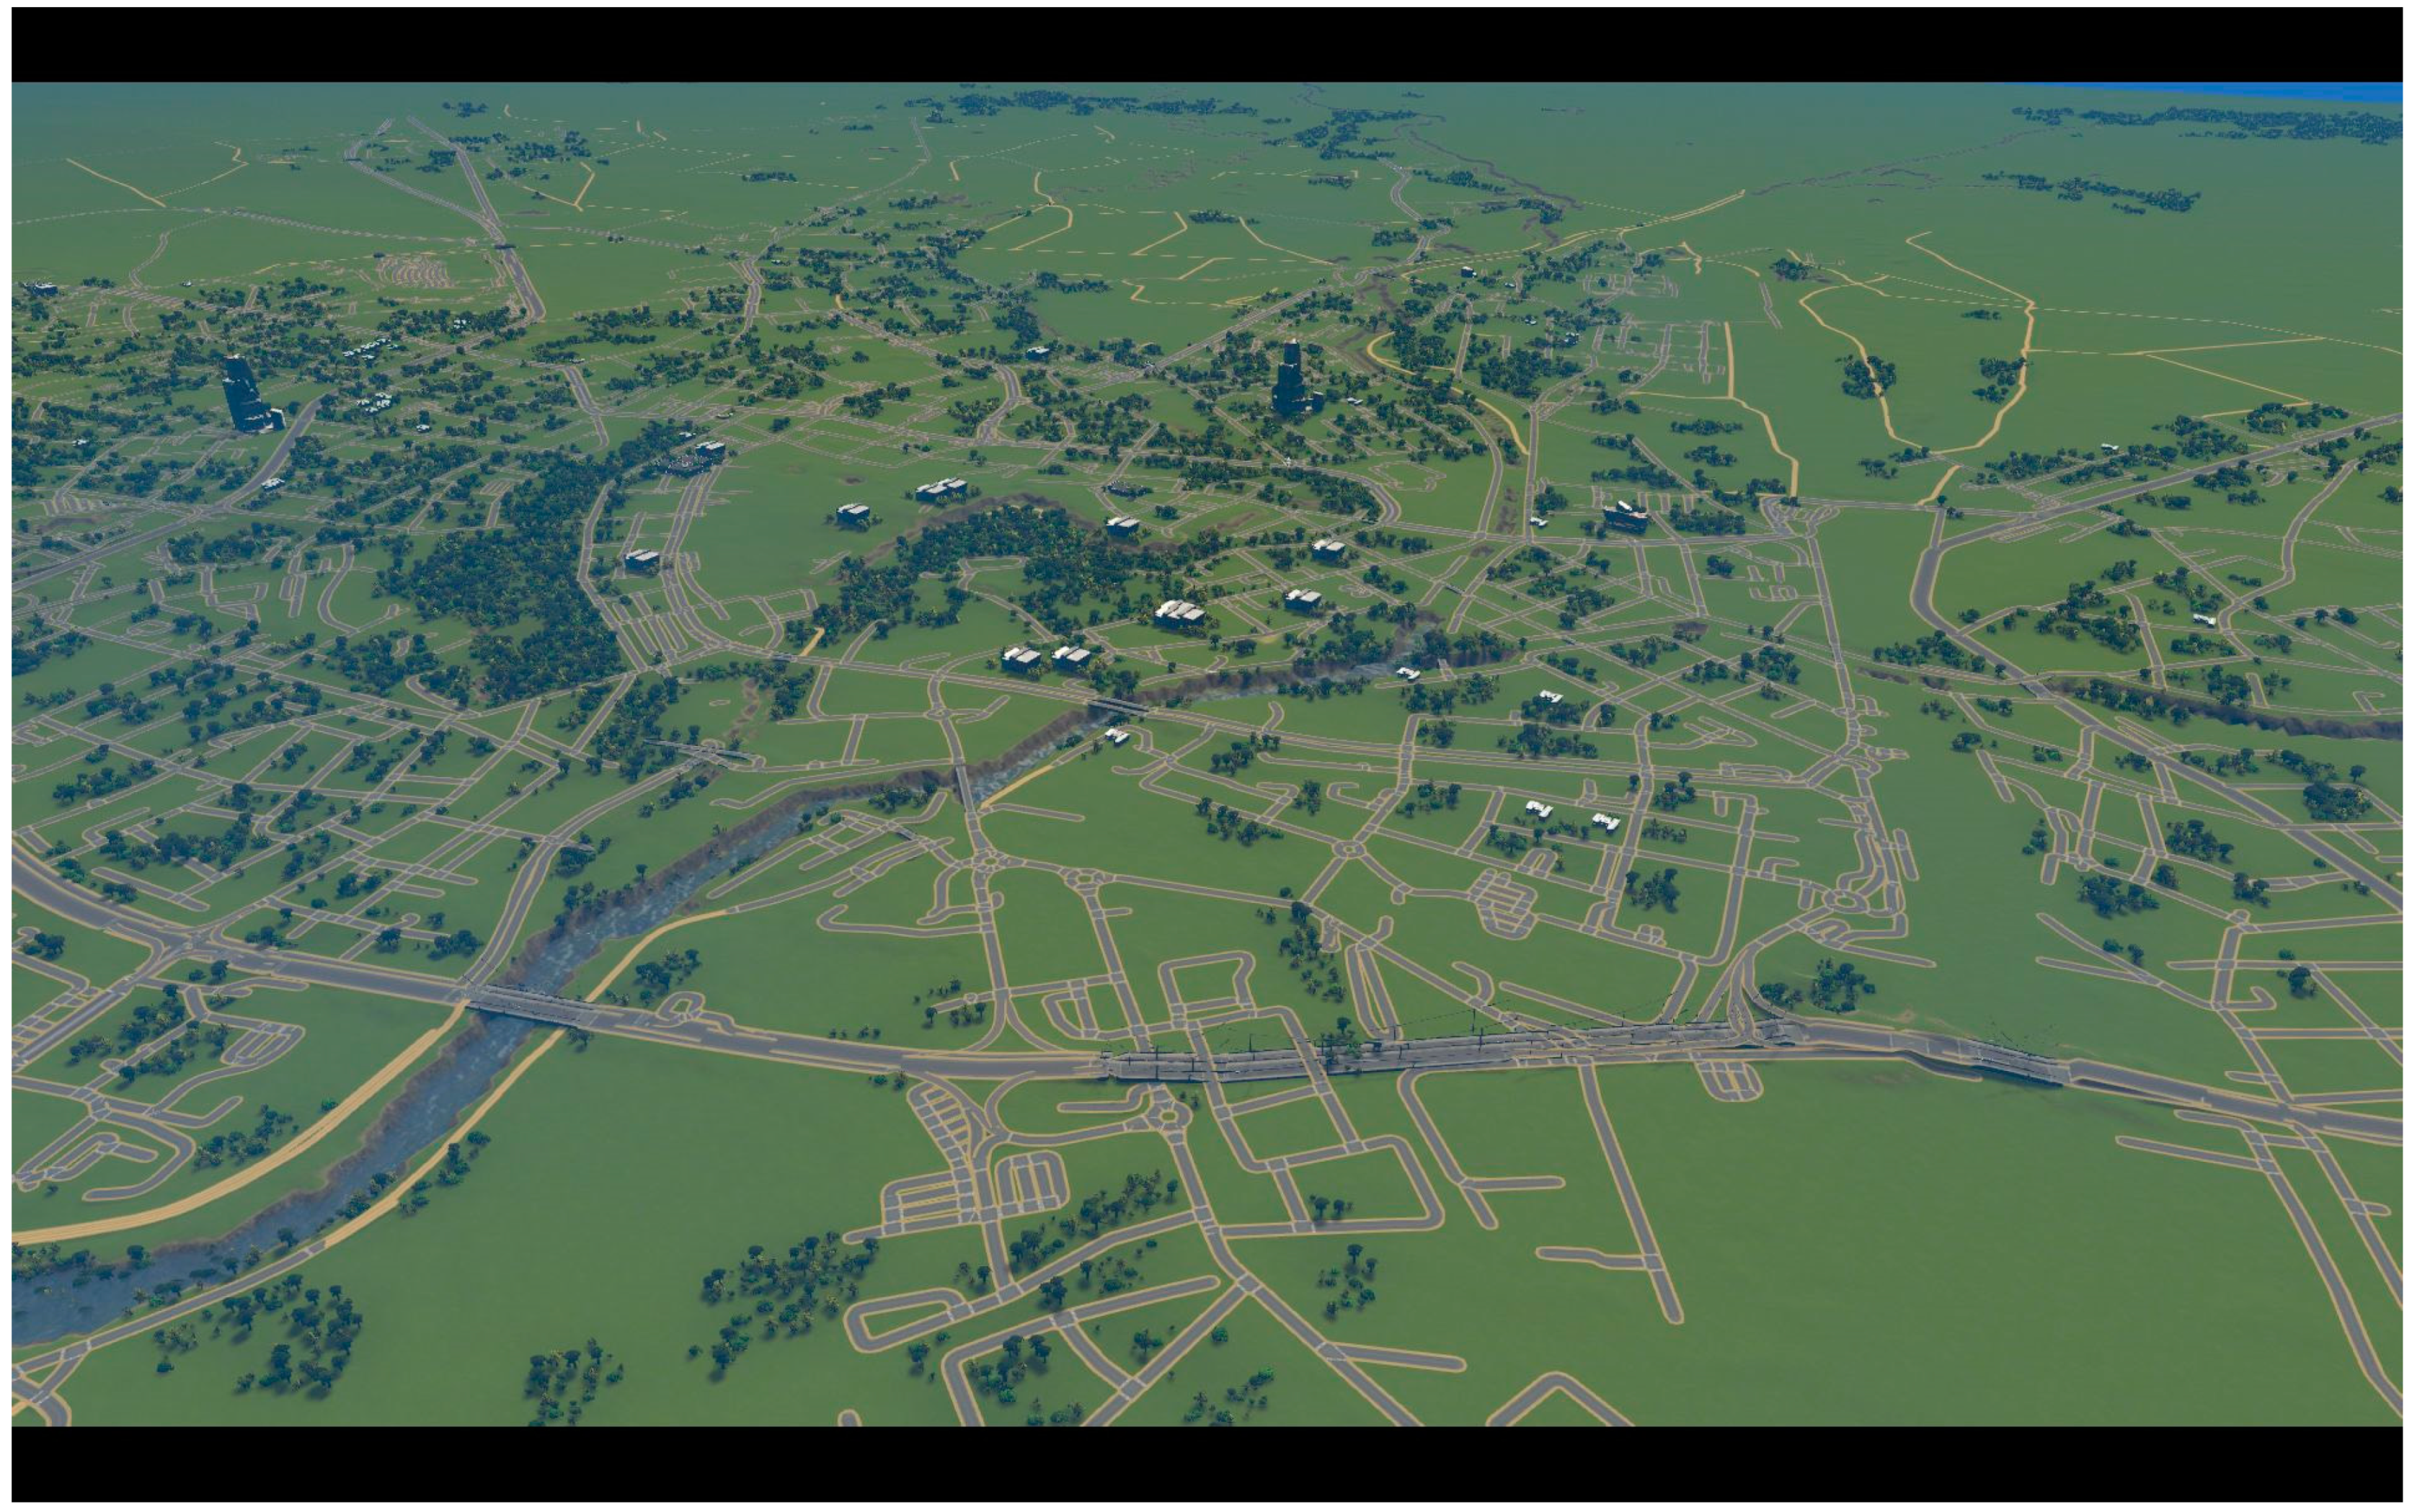 cities skylines maps download no steam